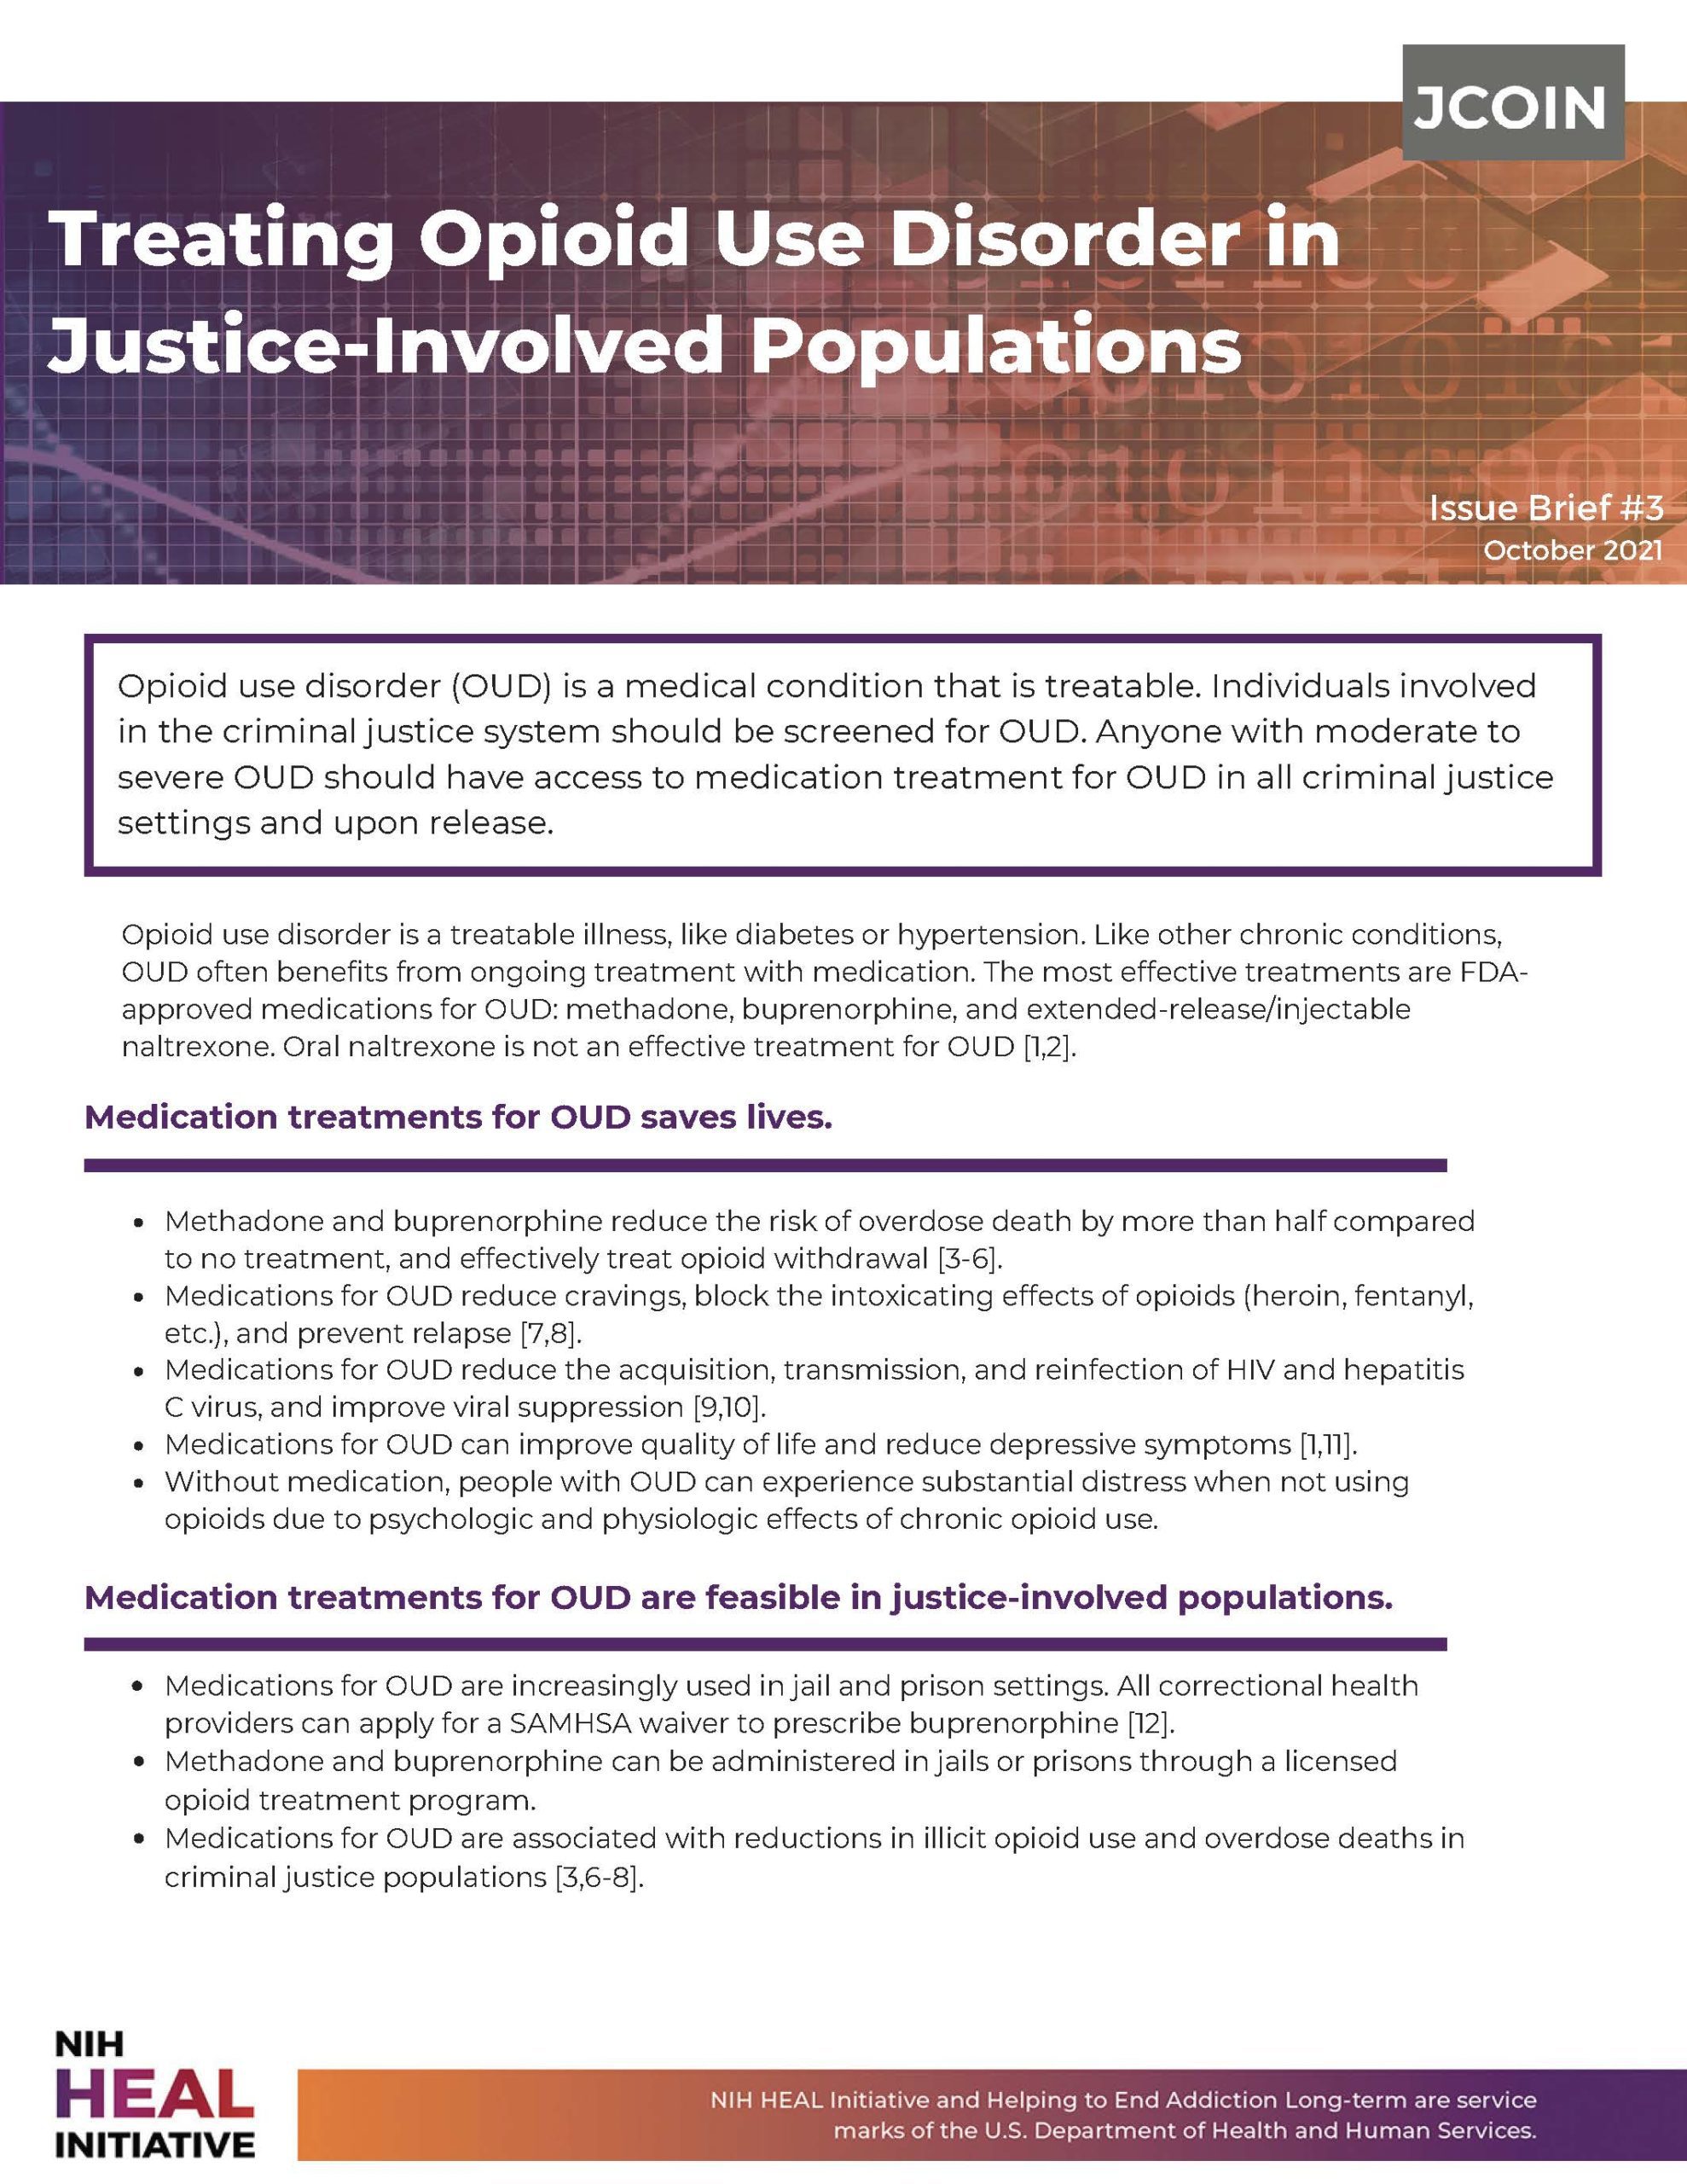 Treating OUD in Justice-Involved Populations_Page_1